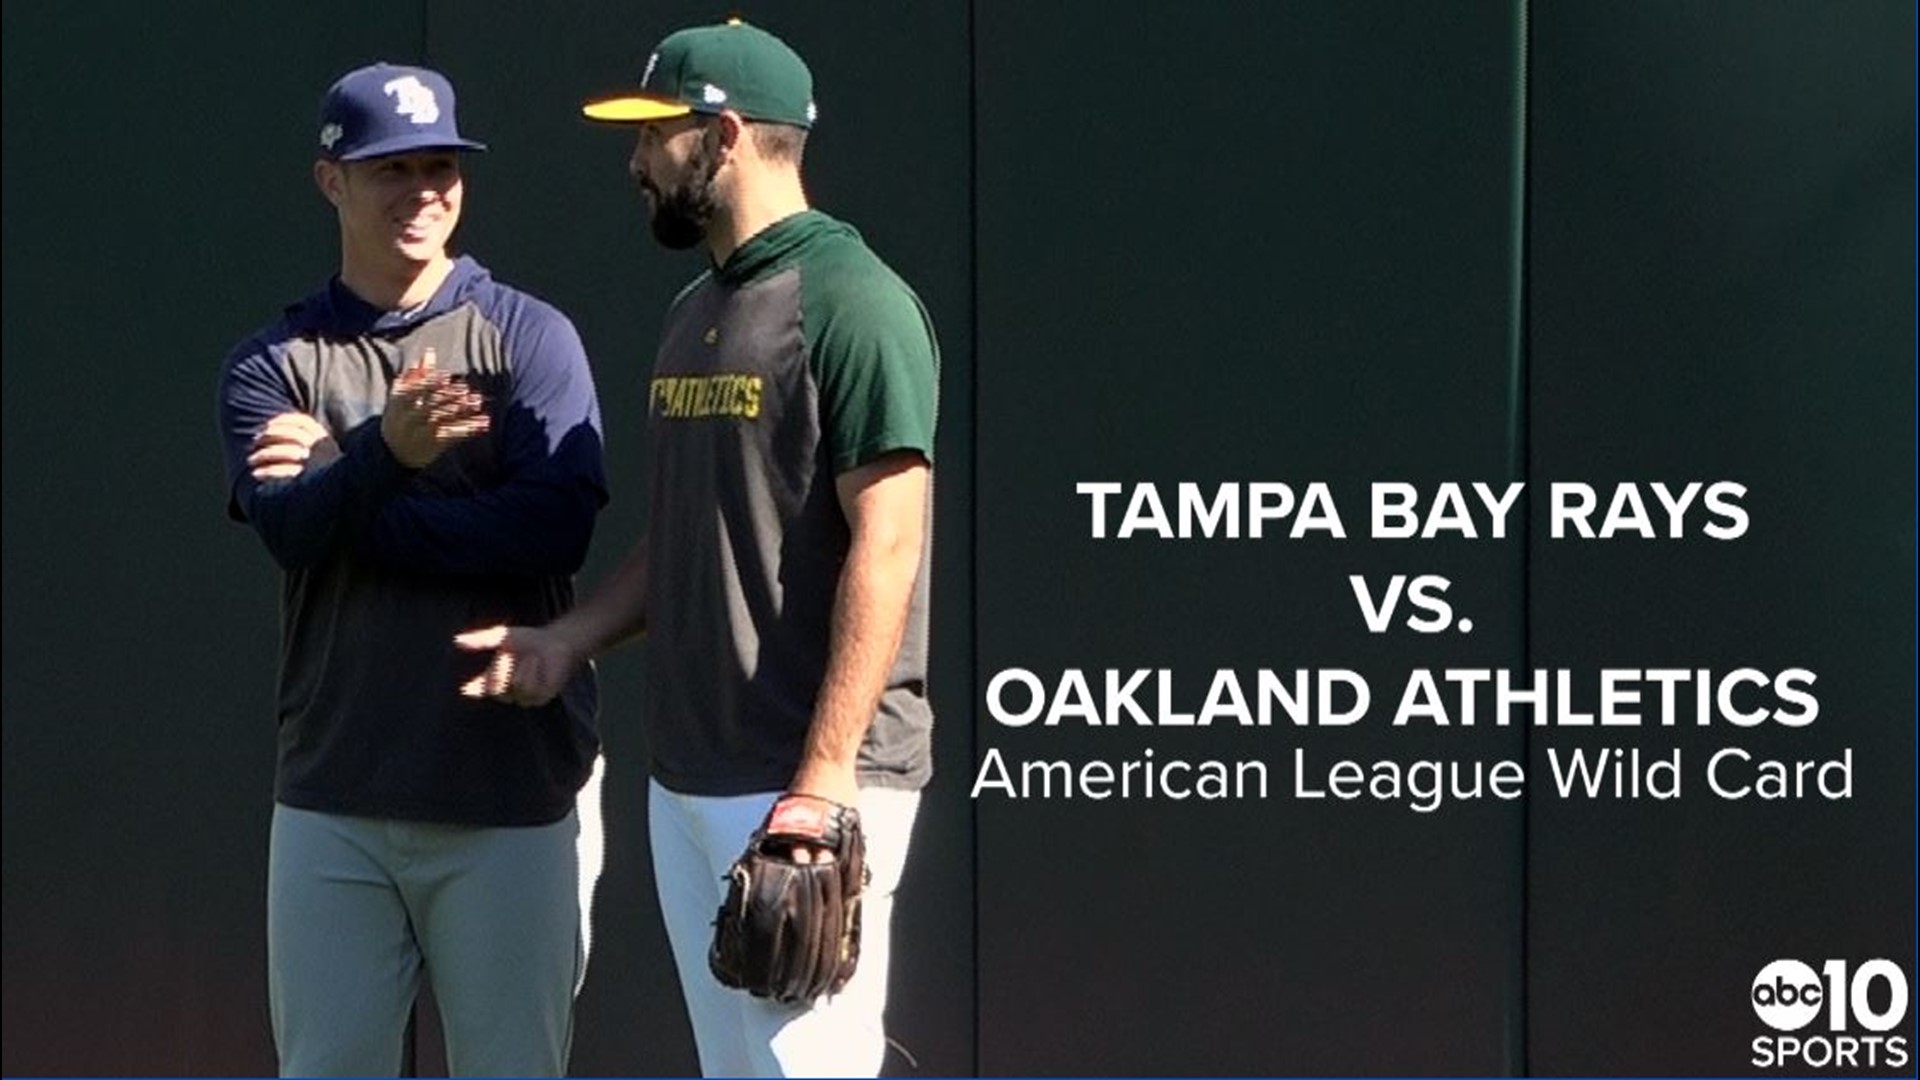 ABC10's Lina Washington takes you to the Coliseum in Oakland where the Athletics and the Tampa Bay Rays are gearing up for the American League Wild Card Game.